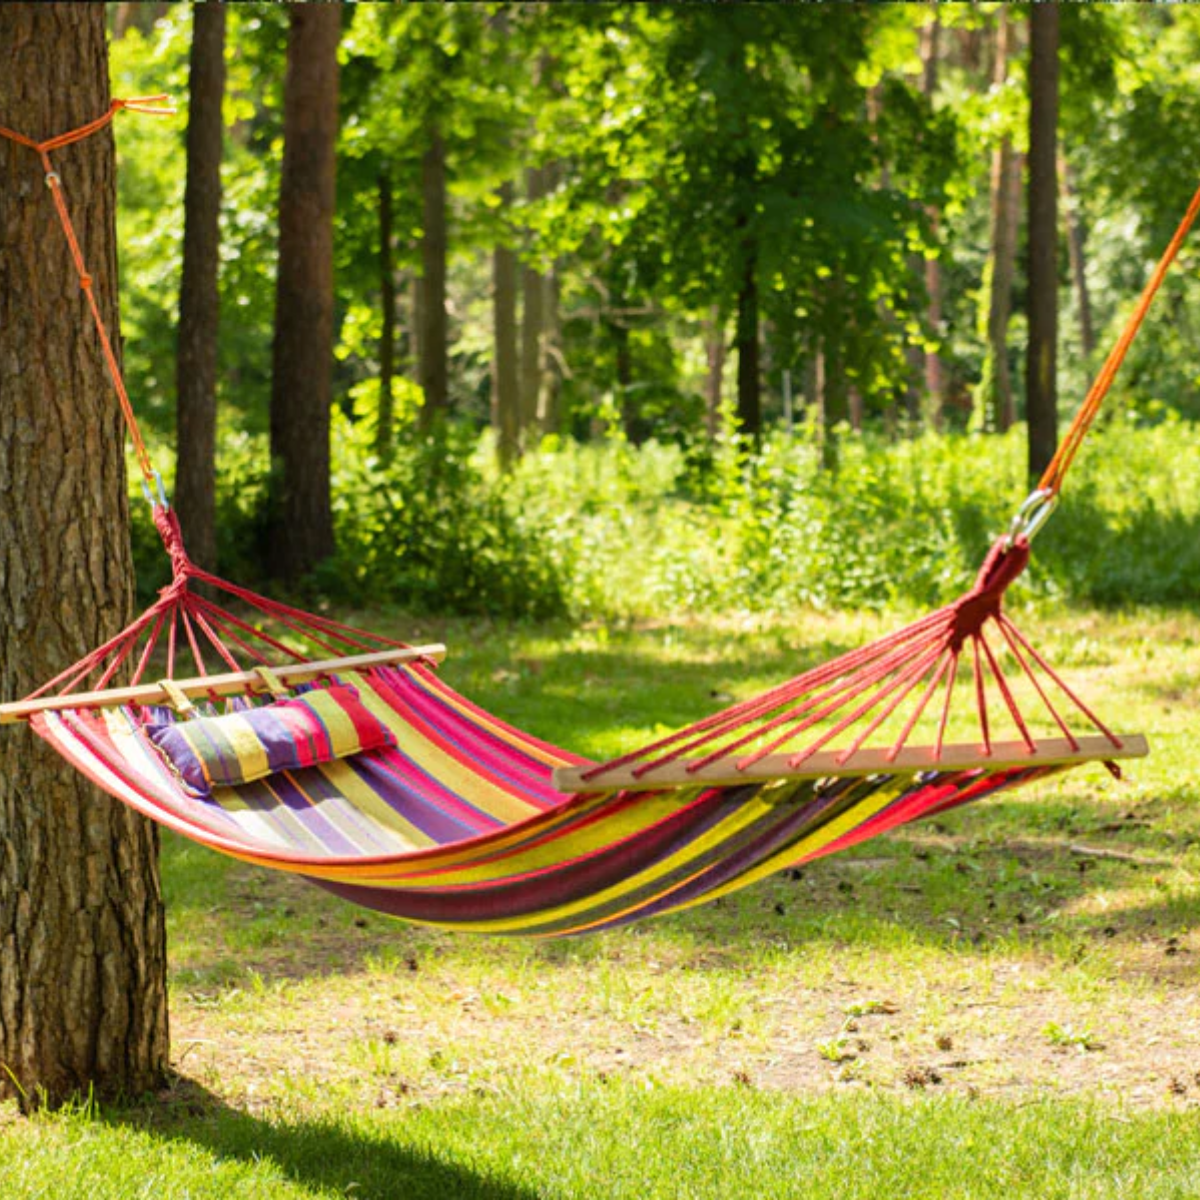 40. Unwind in Style: Outdoor Hammock for Relaxation - Perfect 2nd Anniversary Gift